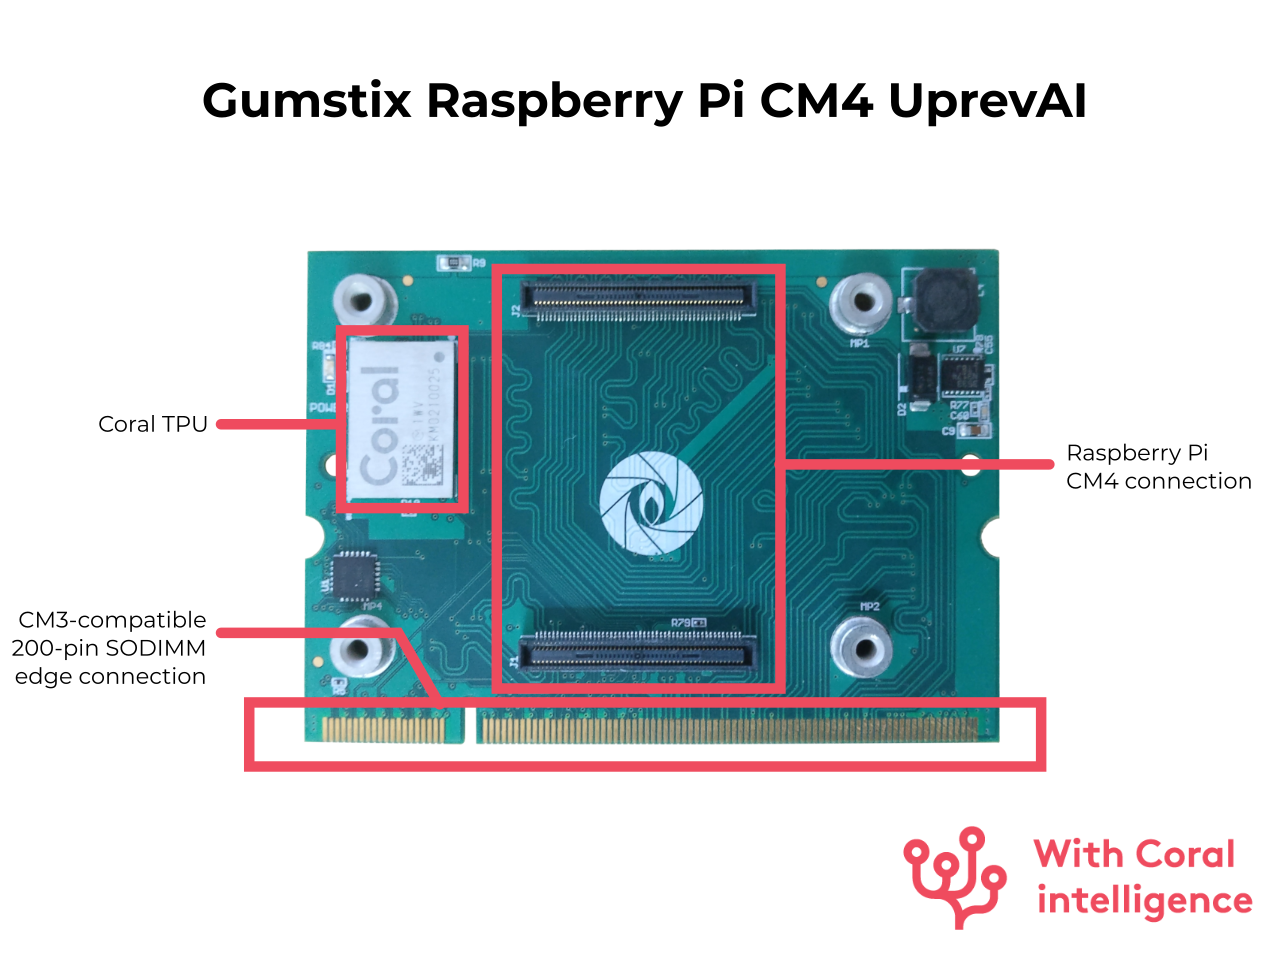 The Gumstix Raspberry Pi CM4 UPrevAI board includes the Coral TPU for embedded AI applications.